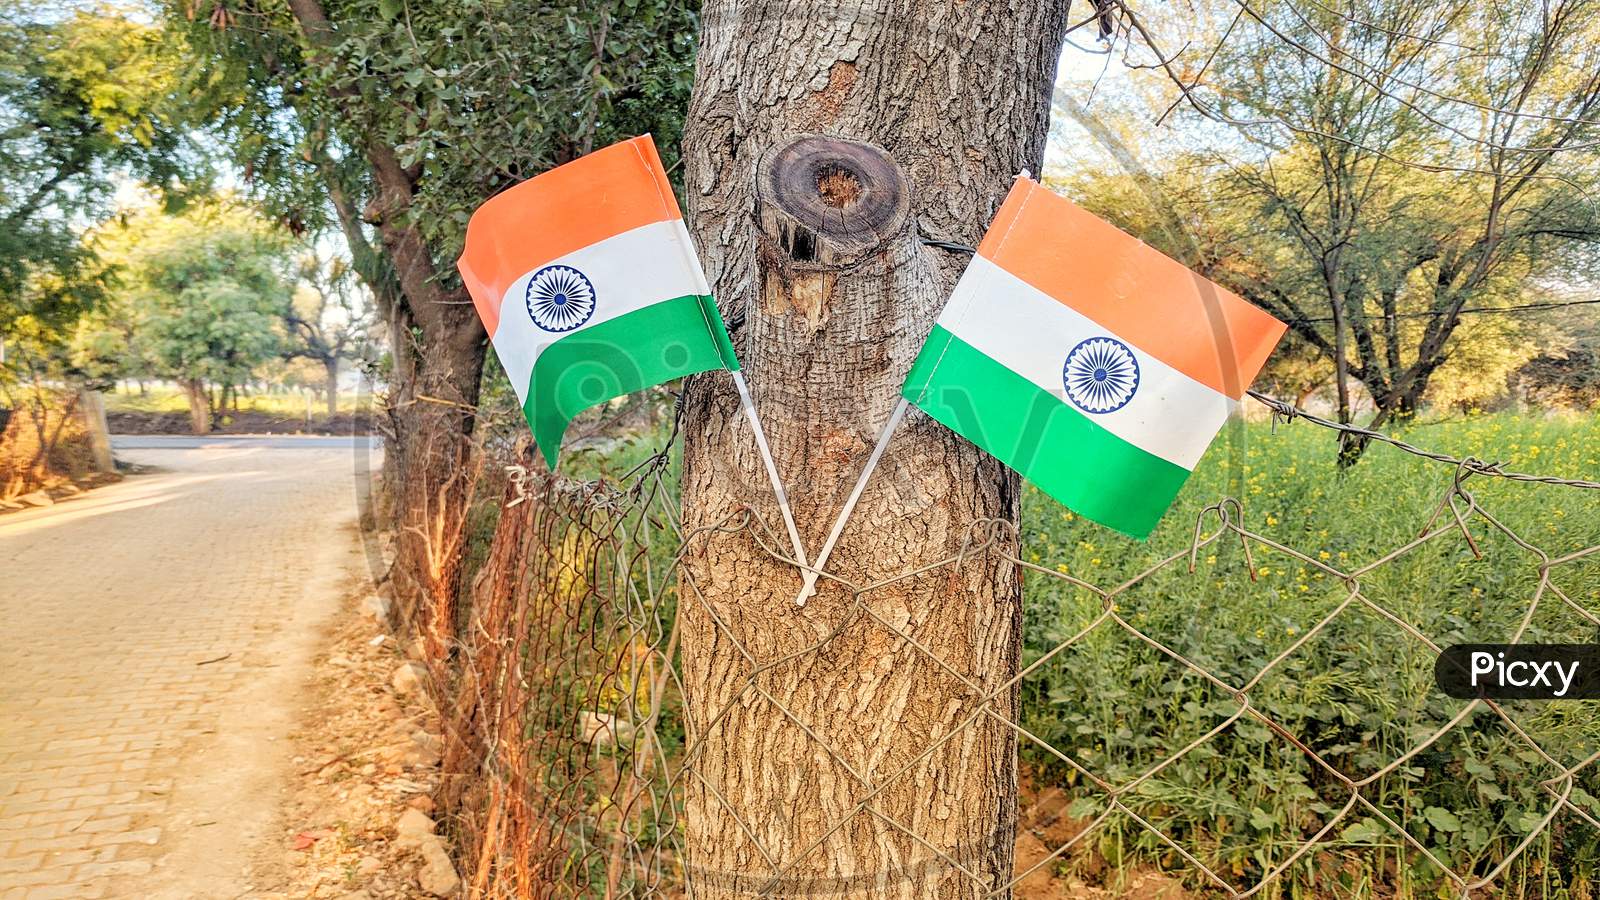 Beautiful View Of Two Tringa Or National Flag With Plastic Flagpole. Closeup Of Glorious Tricolor With 24 Spoke.